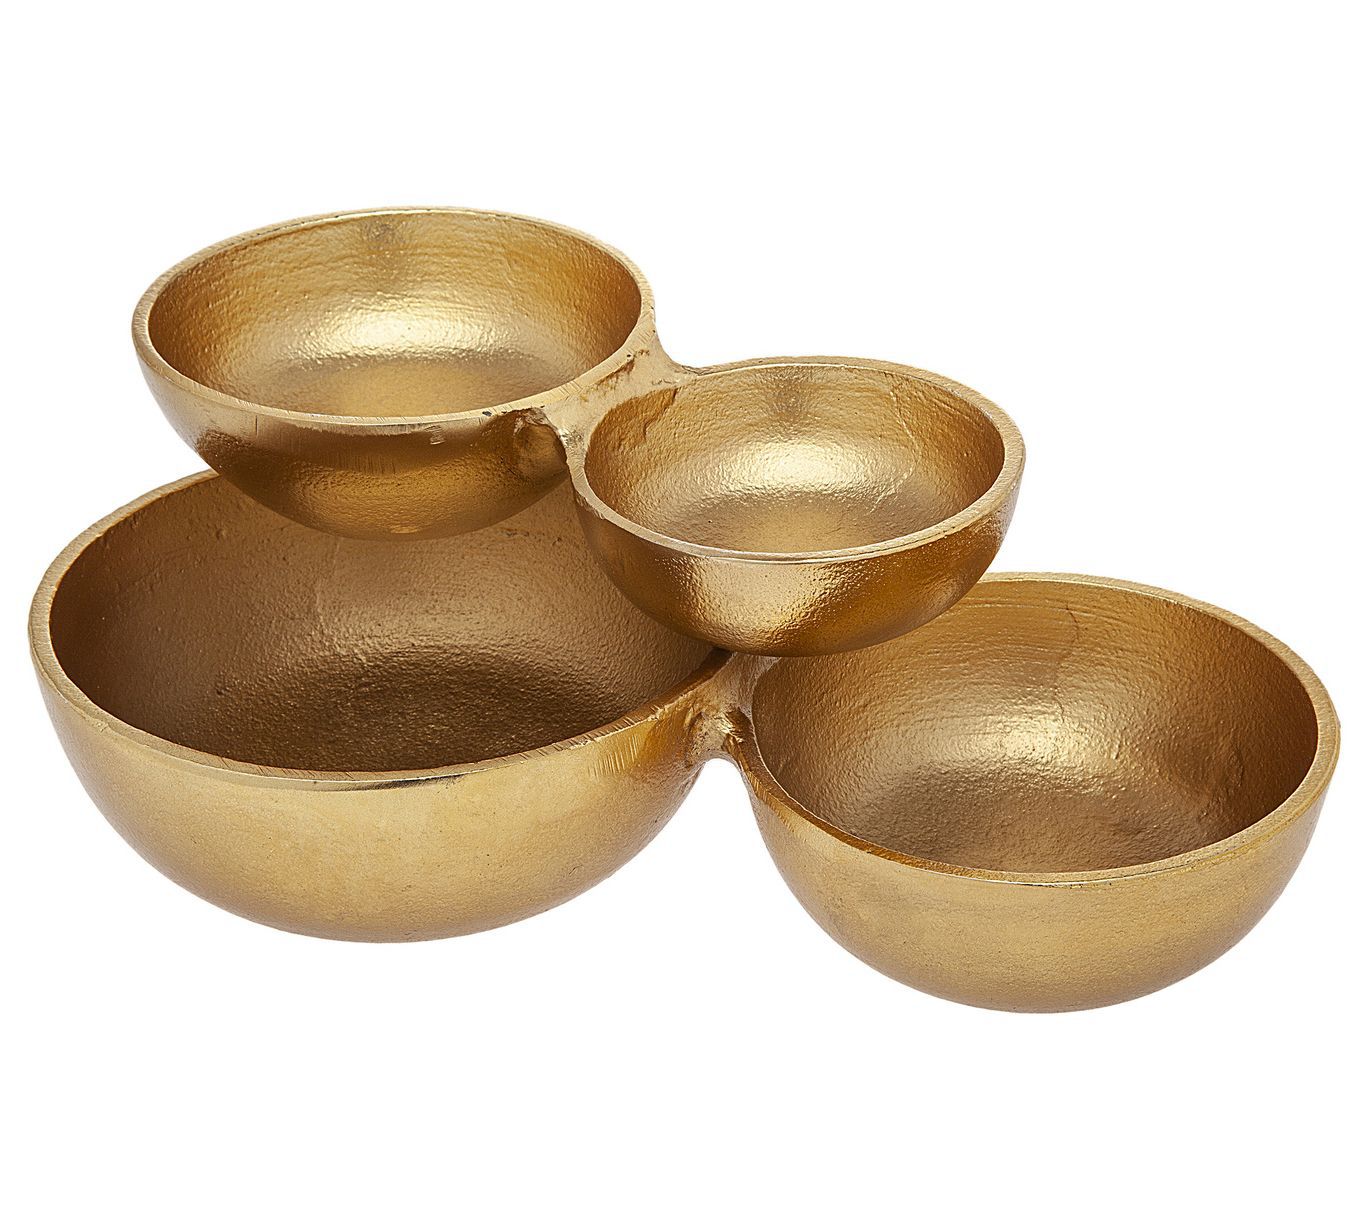 the gold cluster bowls  on a white background